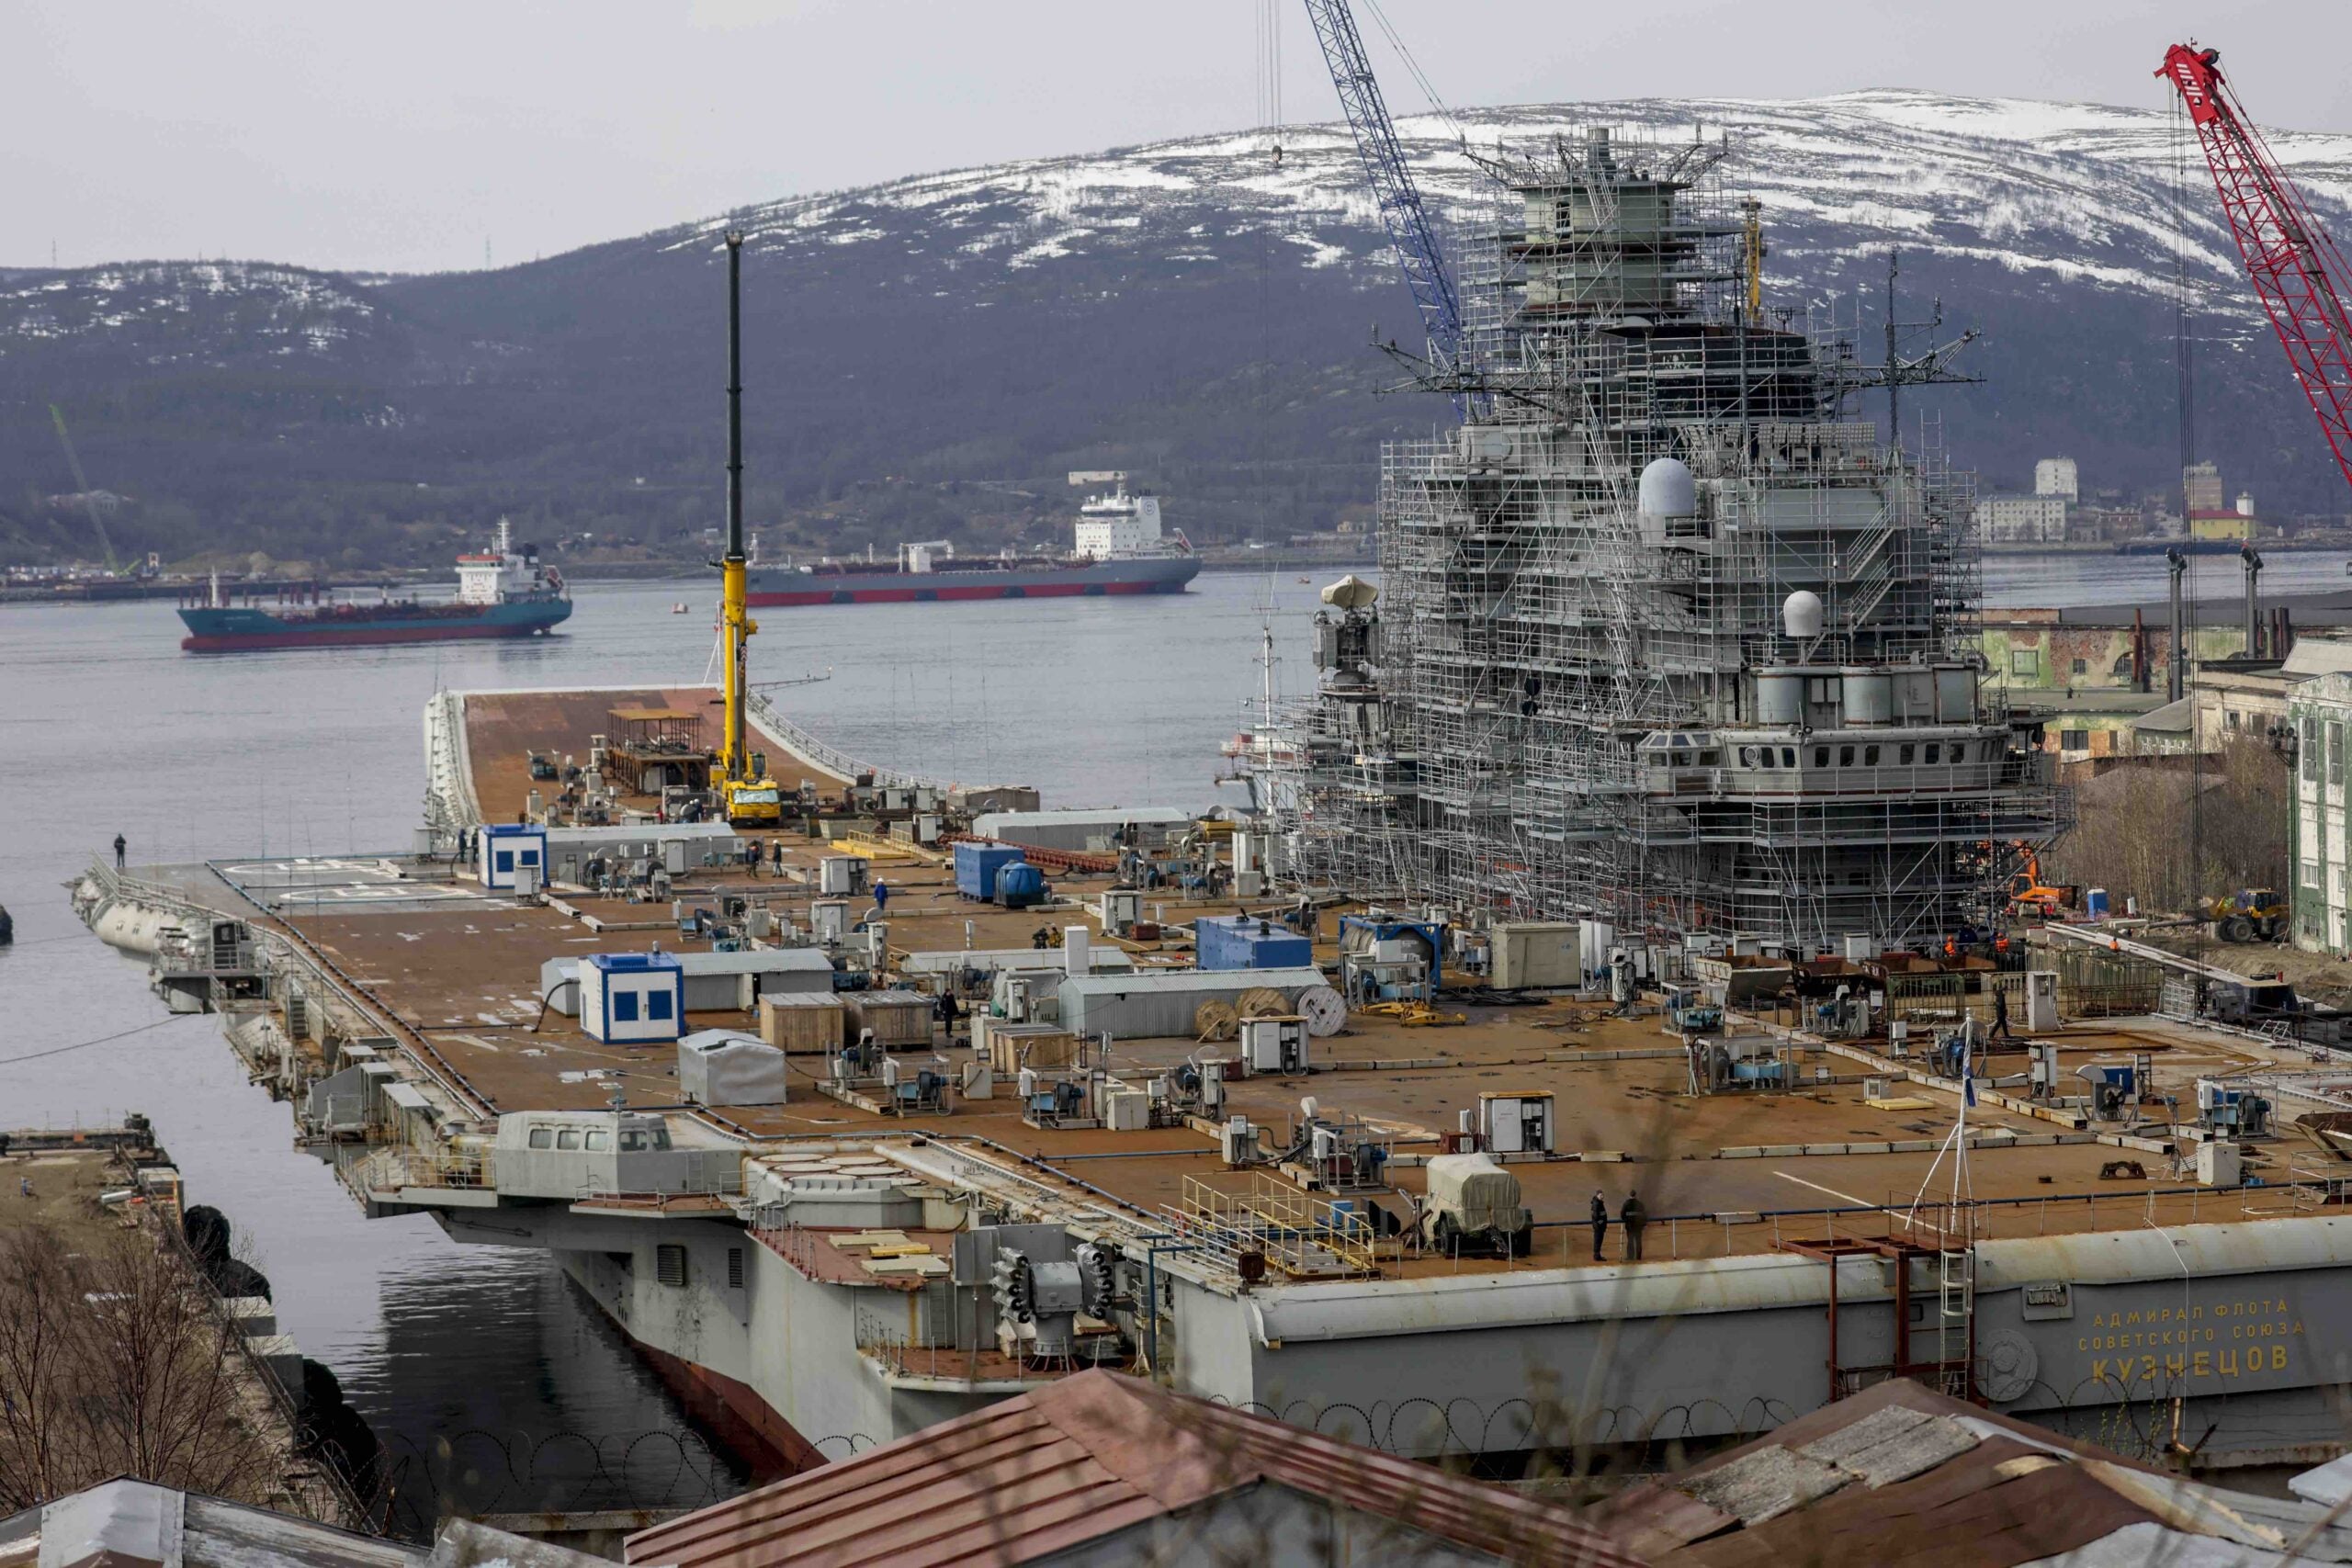 MURMANSK, RUSSIA - MAY 20: Russian Navyâs lone aircraft carrier, the Admiral Flota Sovetskogo Soyuza Kuznetsov, is towed to the 35th squadron shipyard for maintenance and repair works in Murmansk, Russia on May 20, 2022. It is aimed to be completed the maintenance and repair works by the end of 2023. (Photo by Semen Vasileyev/Anadolu Agency via Getty Images)